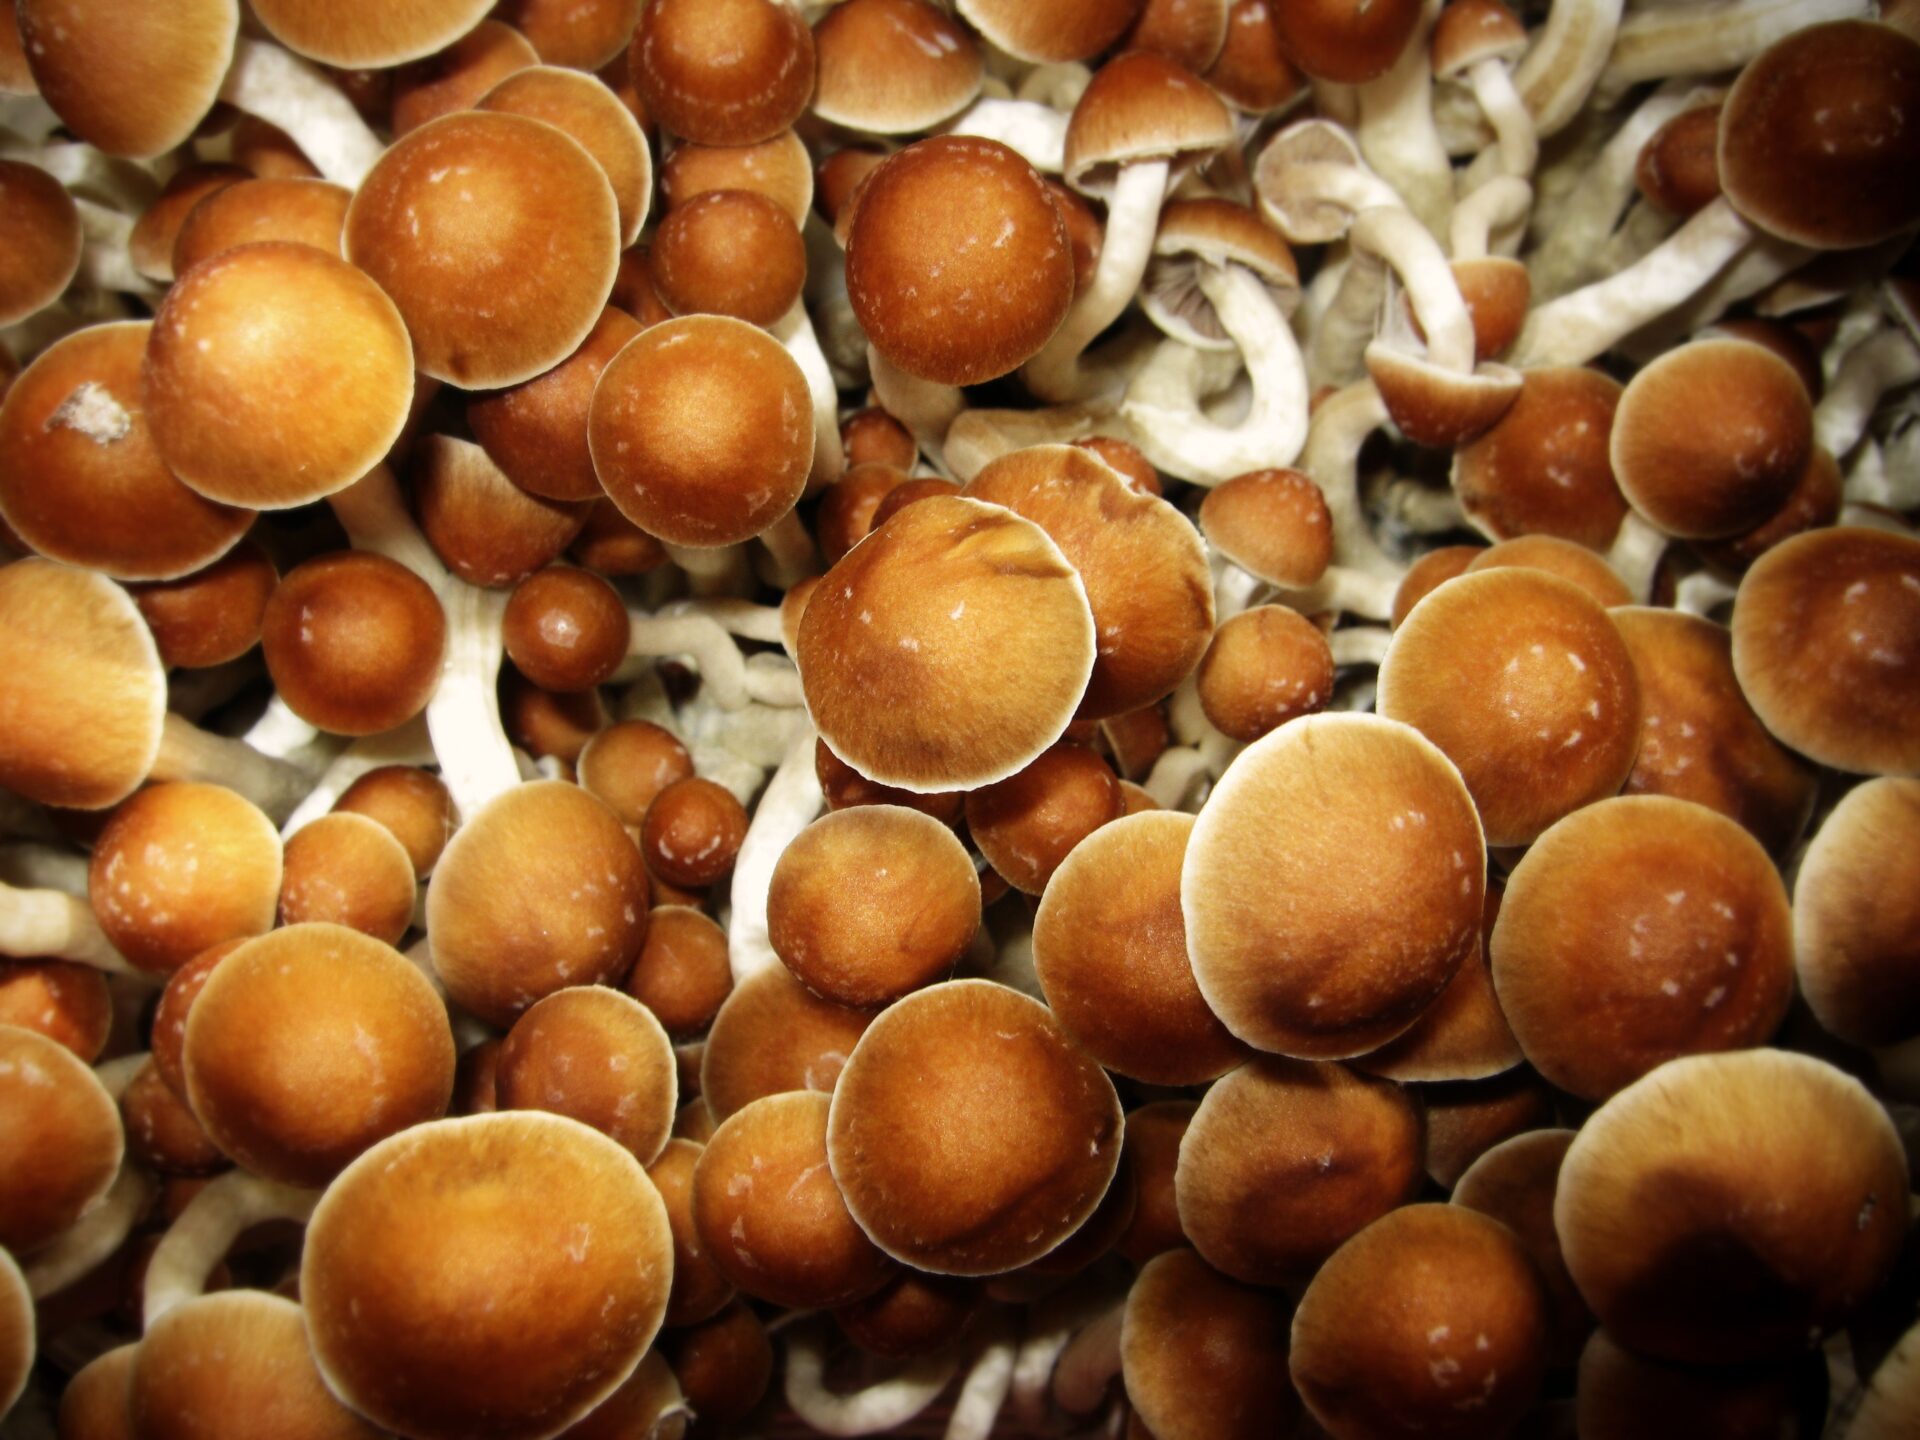 What to Know About Magic Mushroom Use